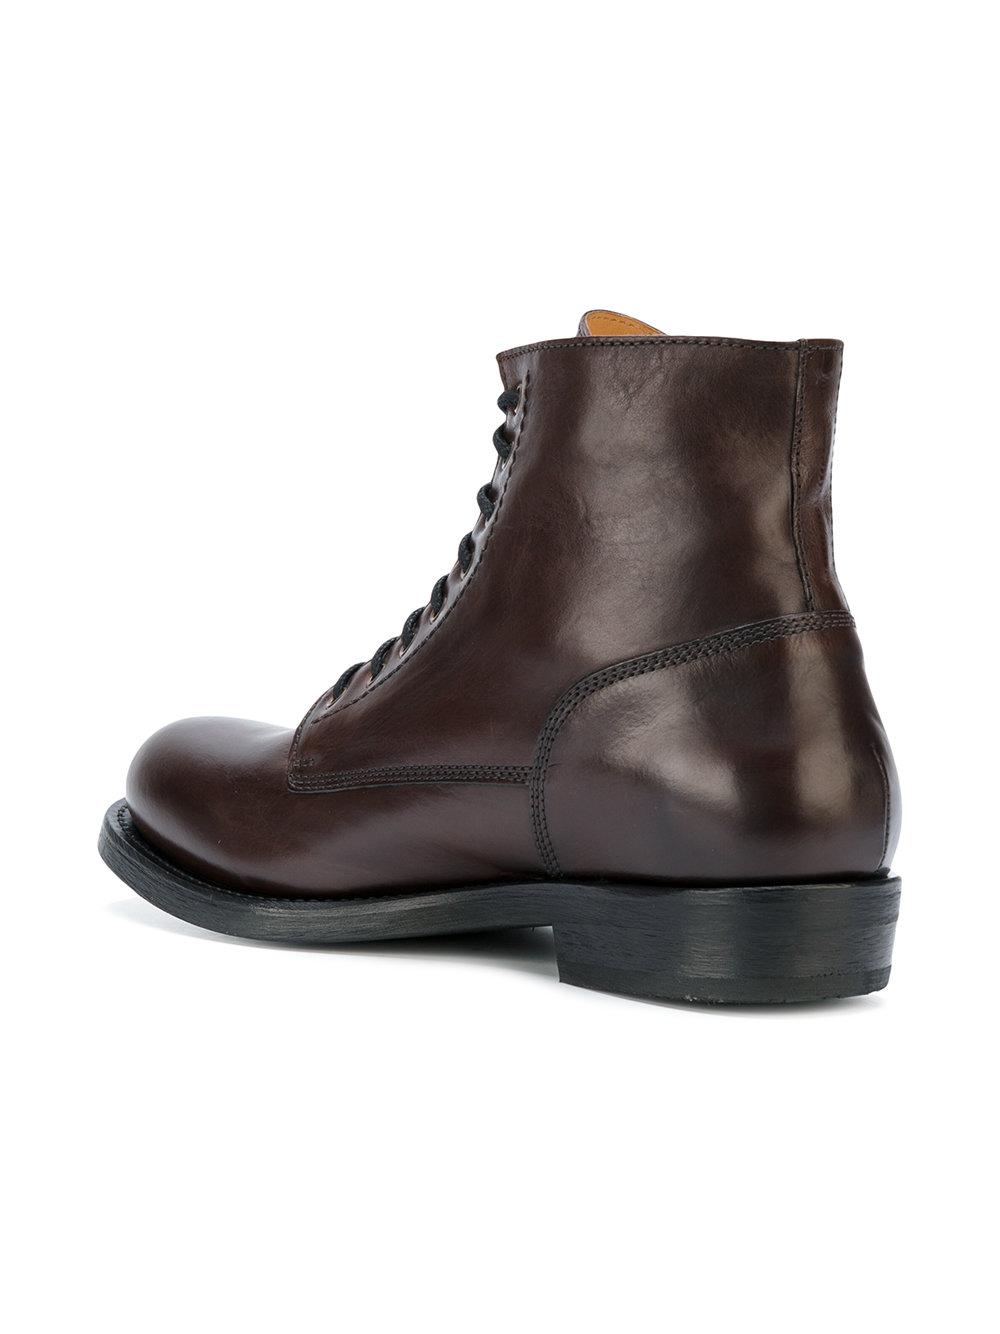 Buttero Lace-up Boots in Brown for Men - Lyst